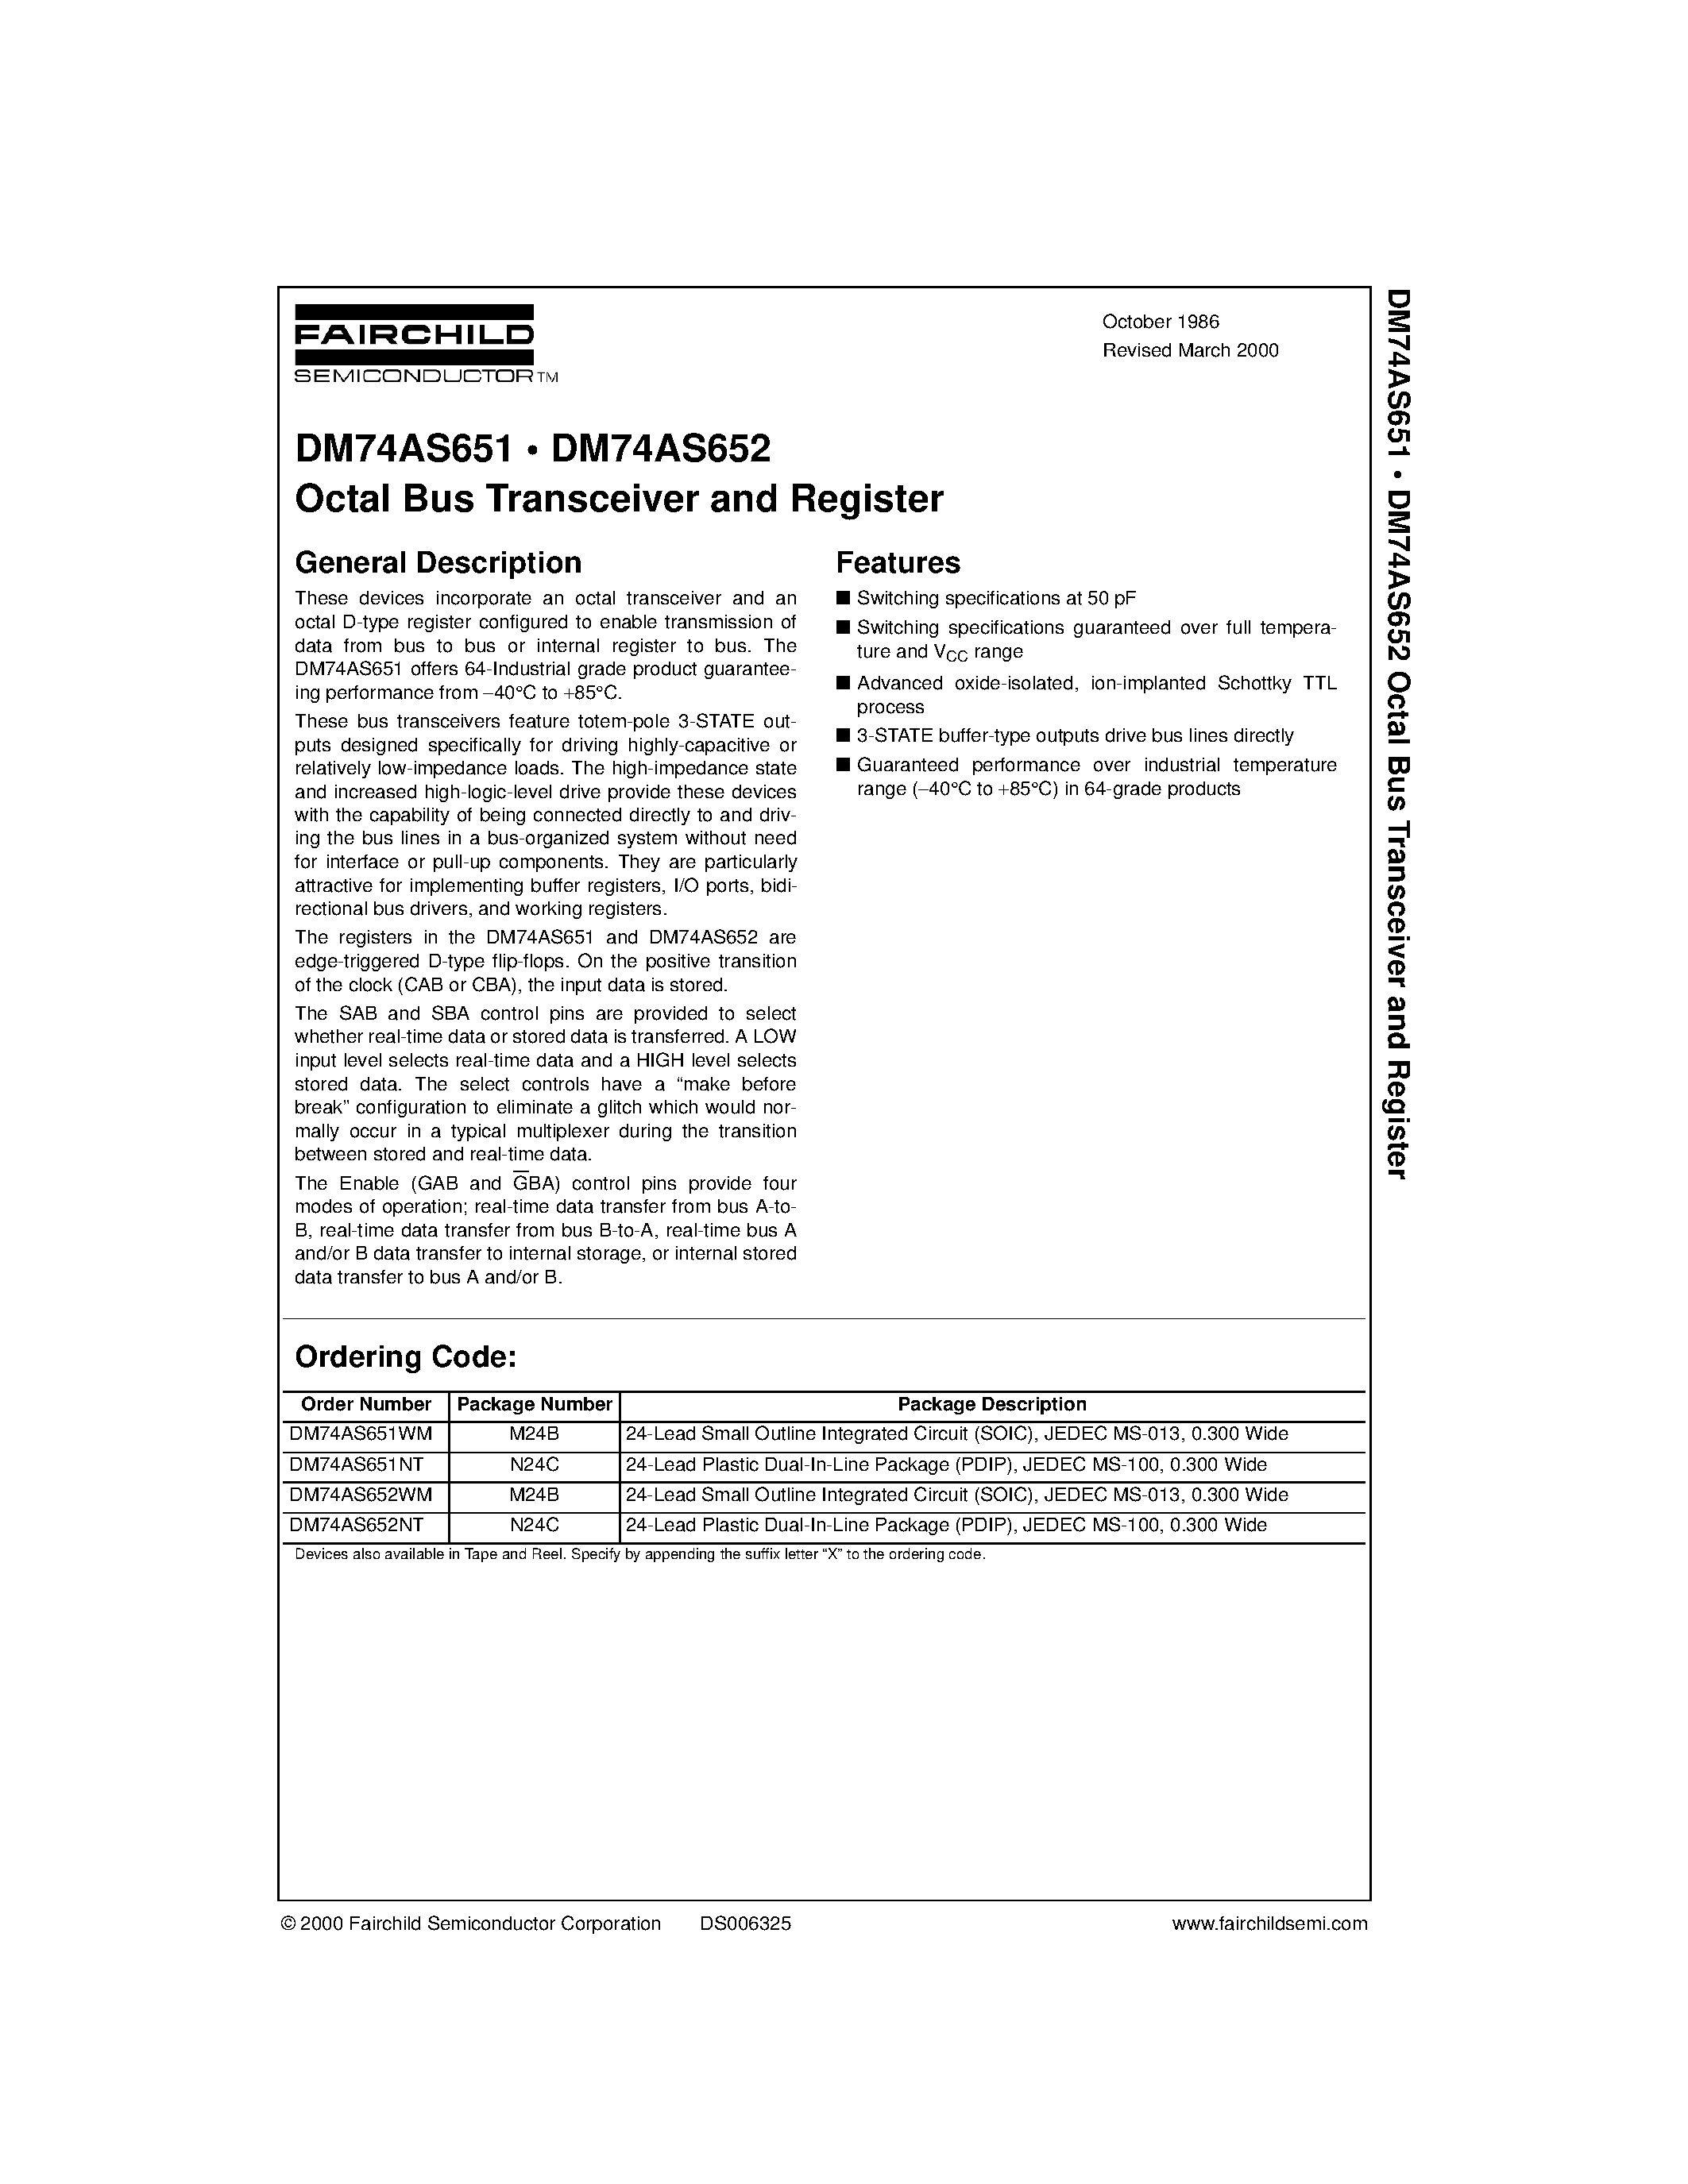 Datasheet DM74AS652WM - Octal Bus Transceiver and Register page 1